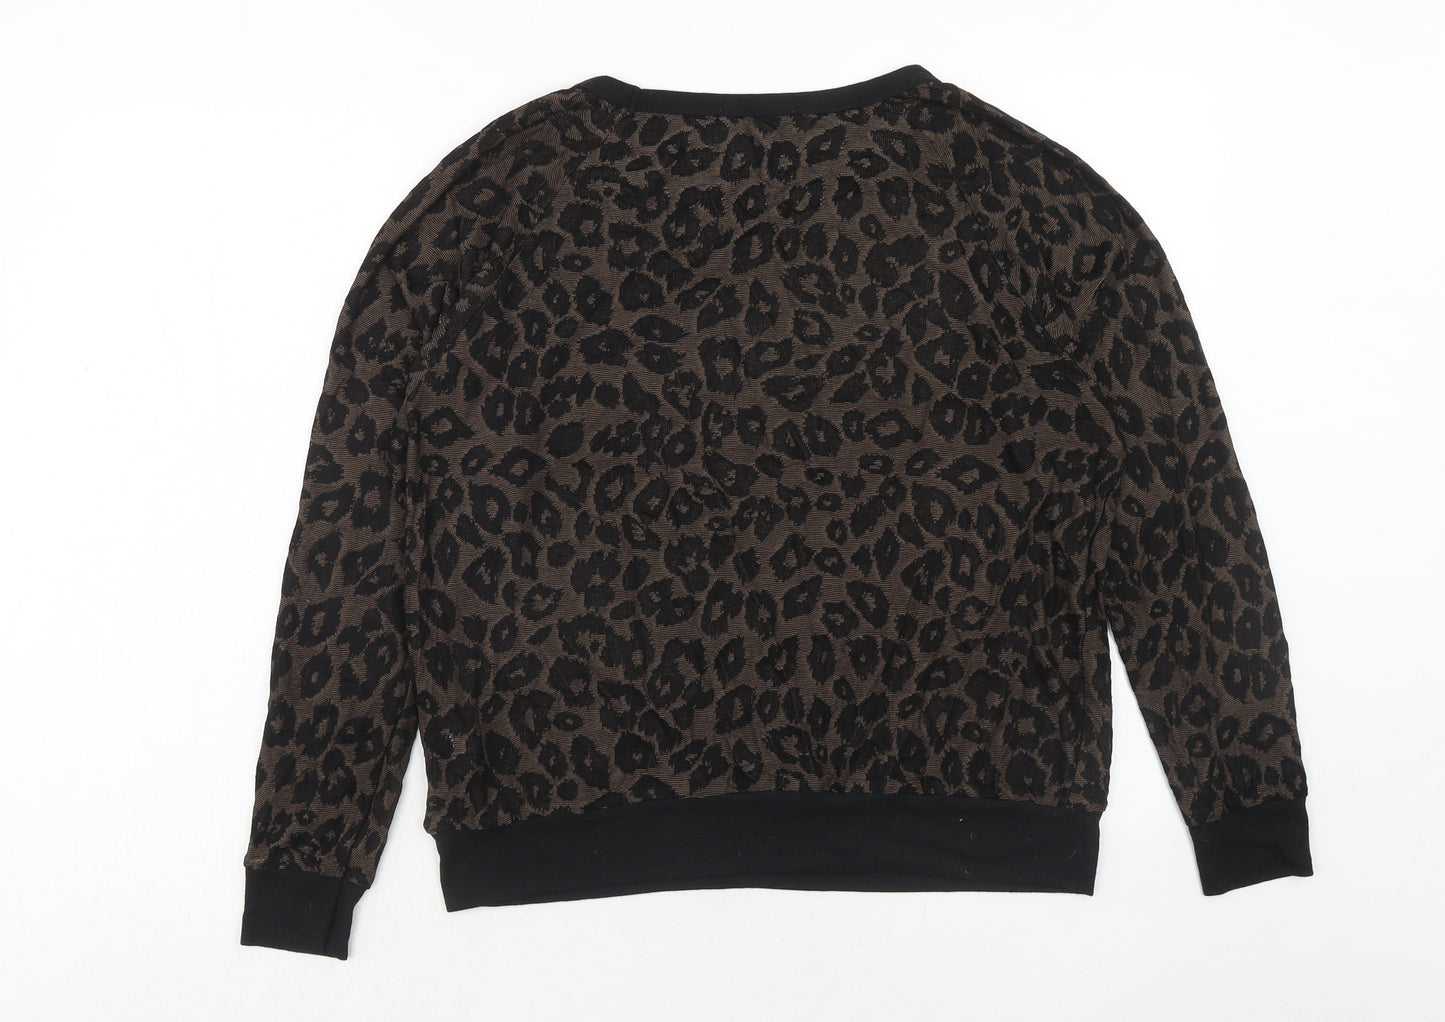 River Island Womens Brown Boat Neck Animal Print Polyester Pullover Jumper Size 16 - Leopard Pattern